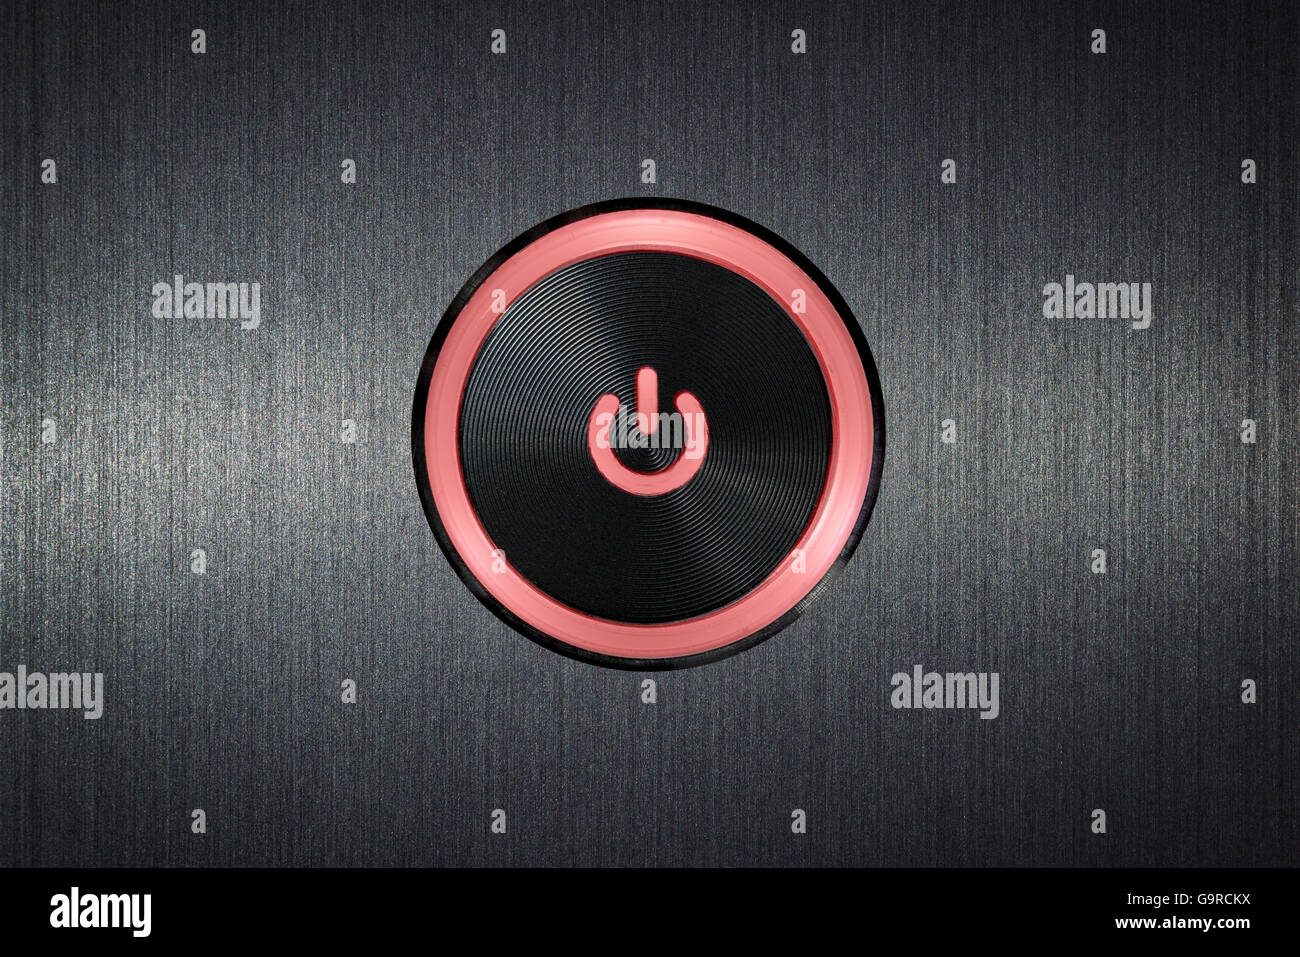 switch button on off with symbol on dark grey metallic background Stock Photo